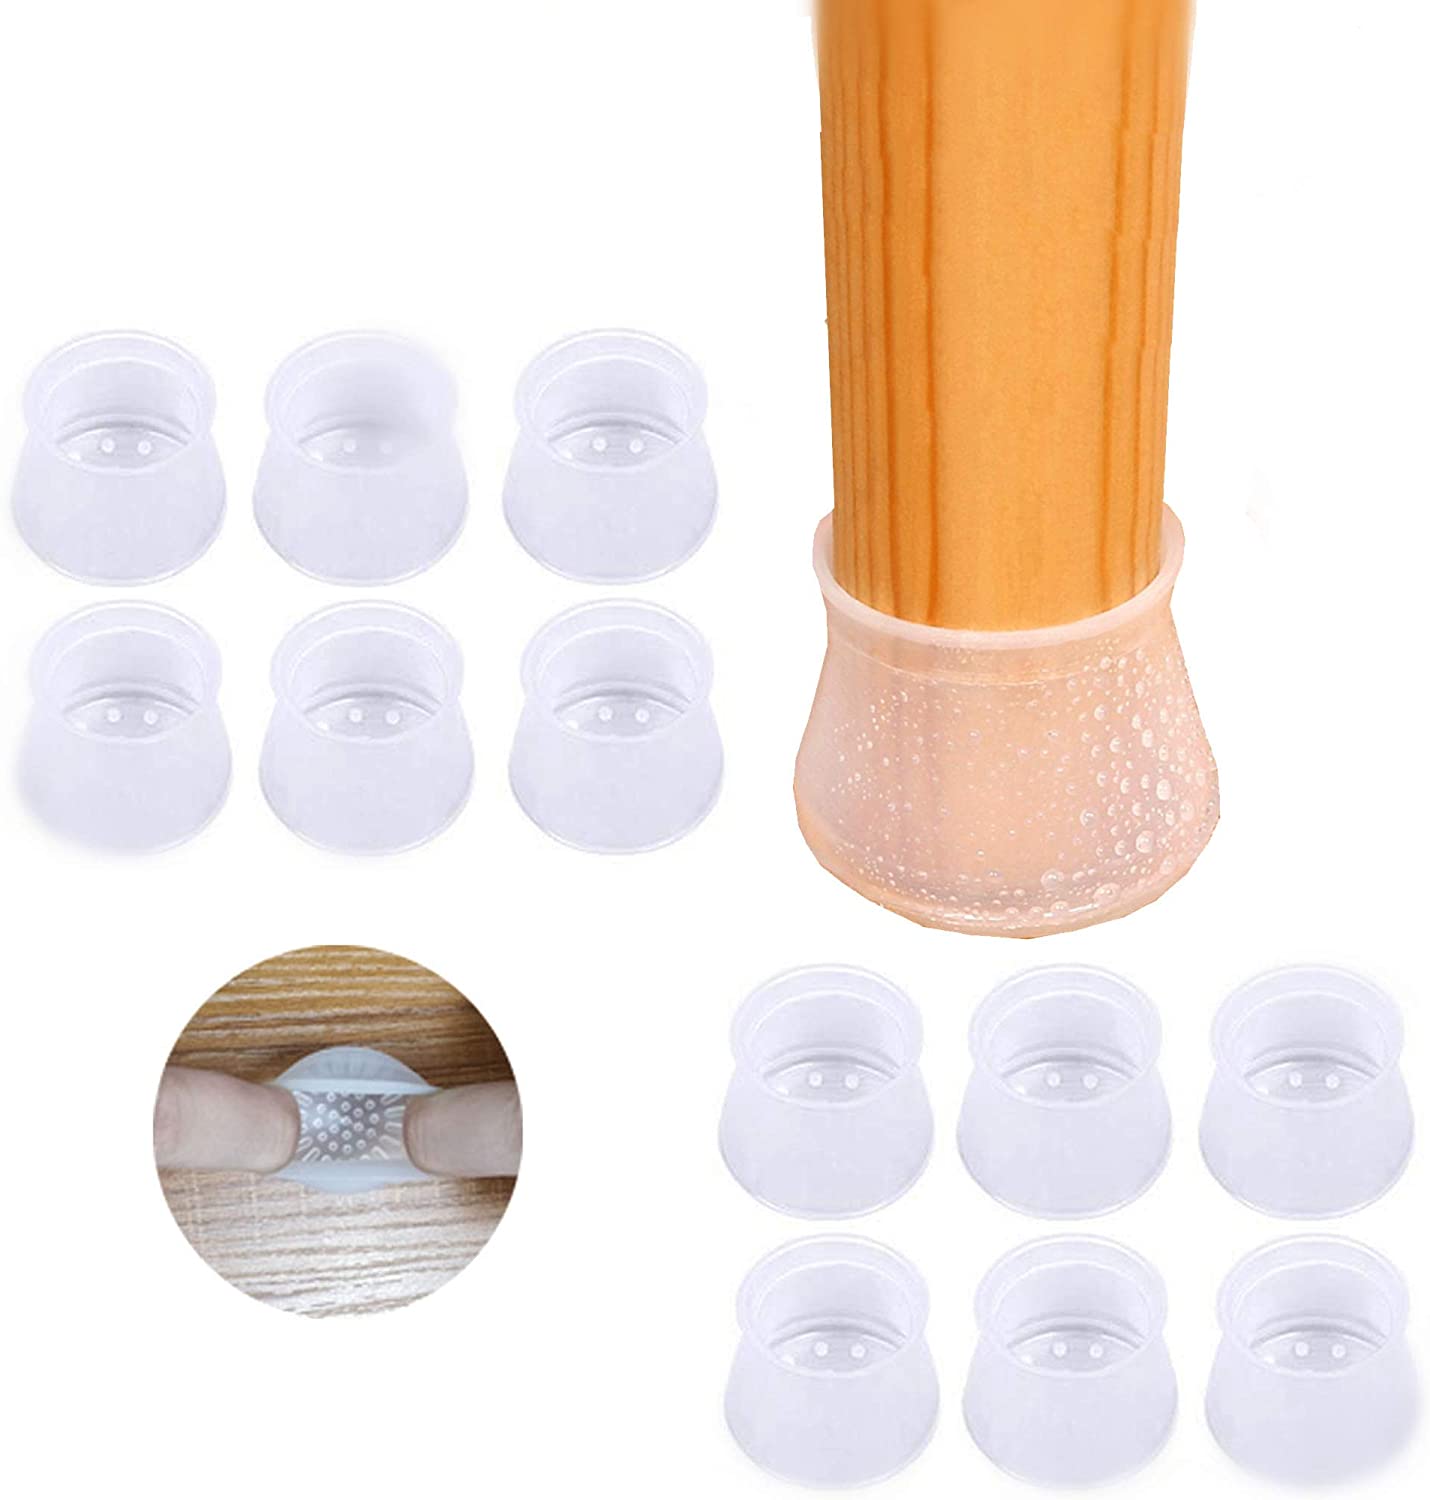 Pack of 24 Pcs Furniture Silicon Non-Slip Protection Cover Silicone Chair Table Foot Cover Protector